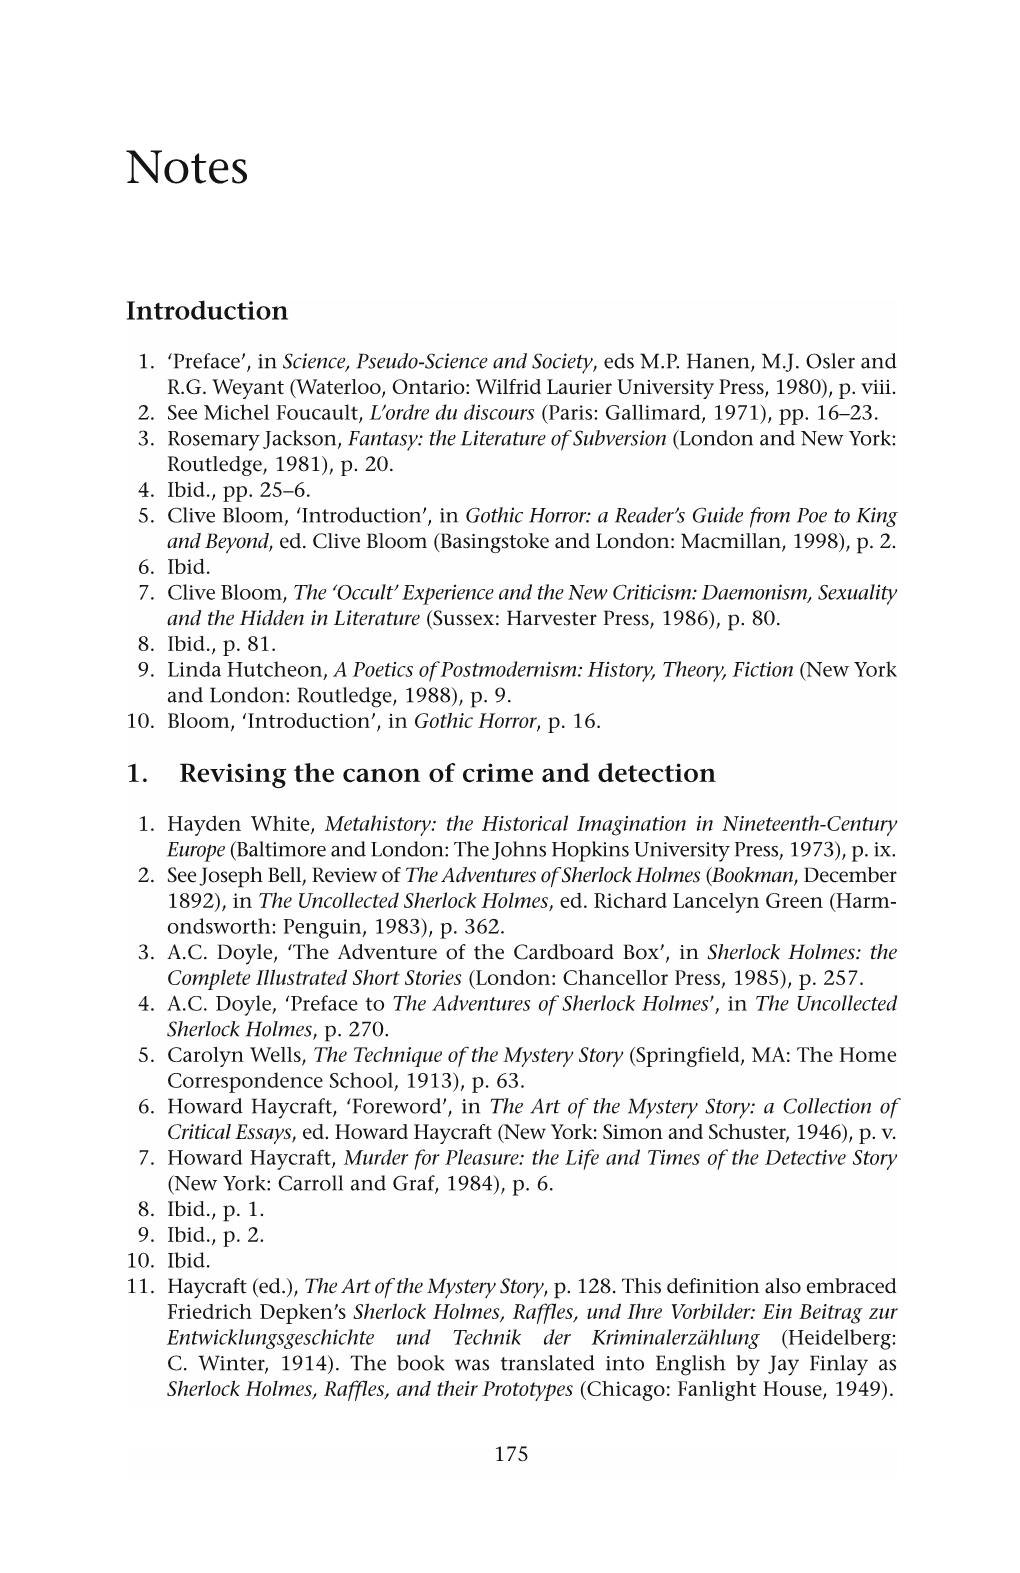 Introduction 1. Revising the Canon of Crime and Detection